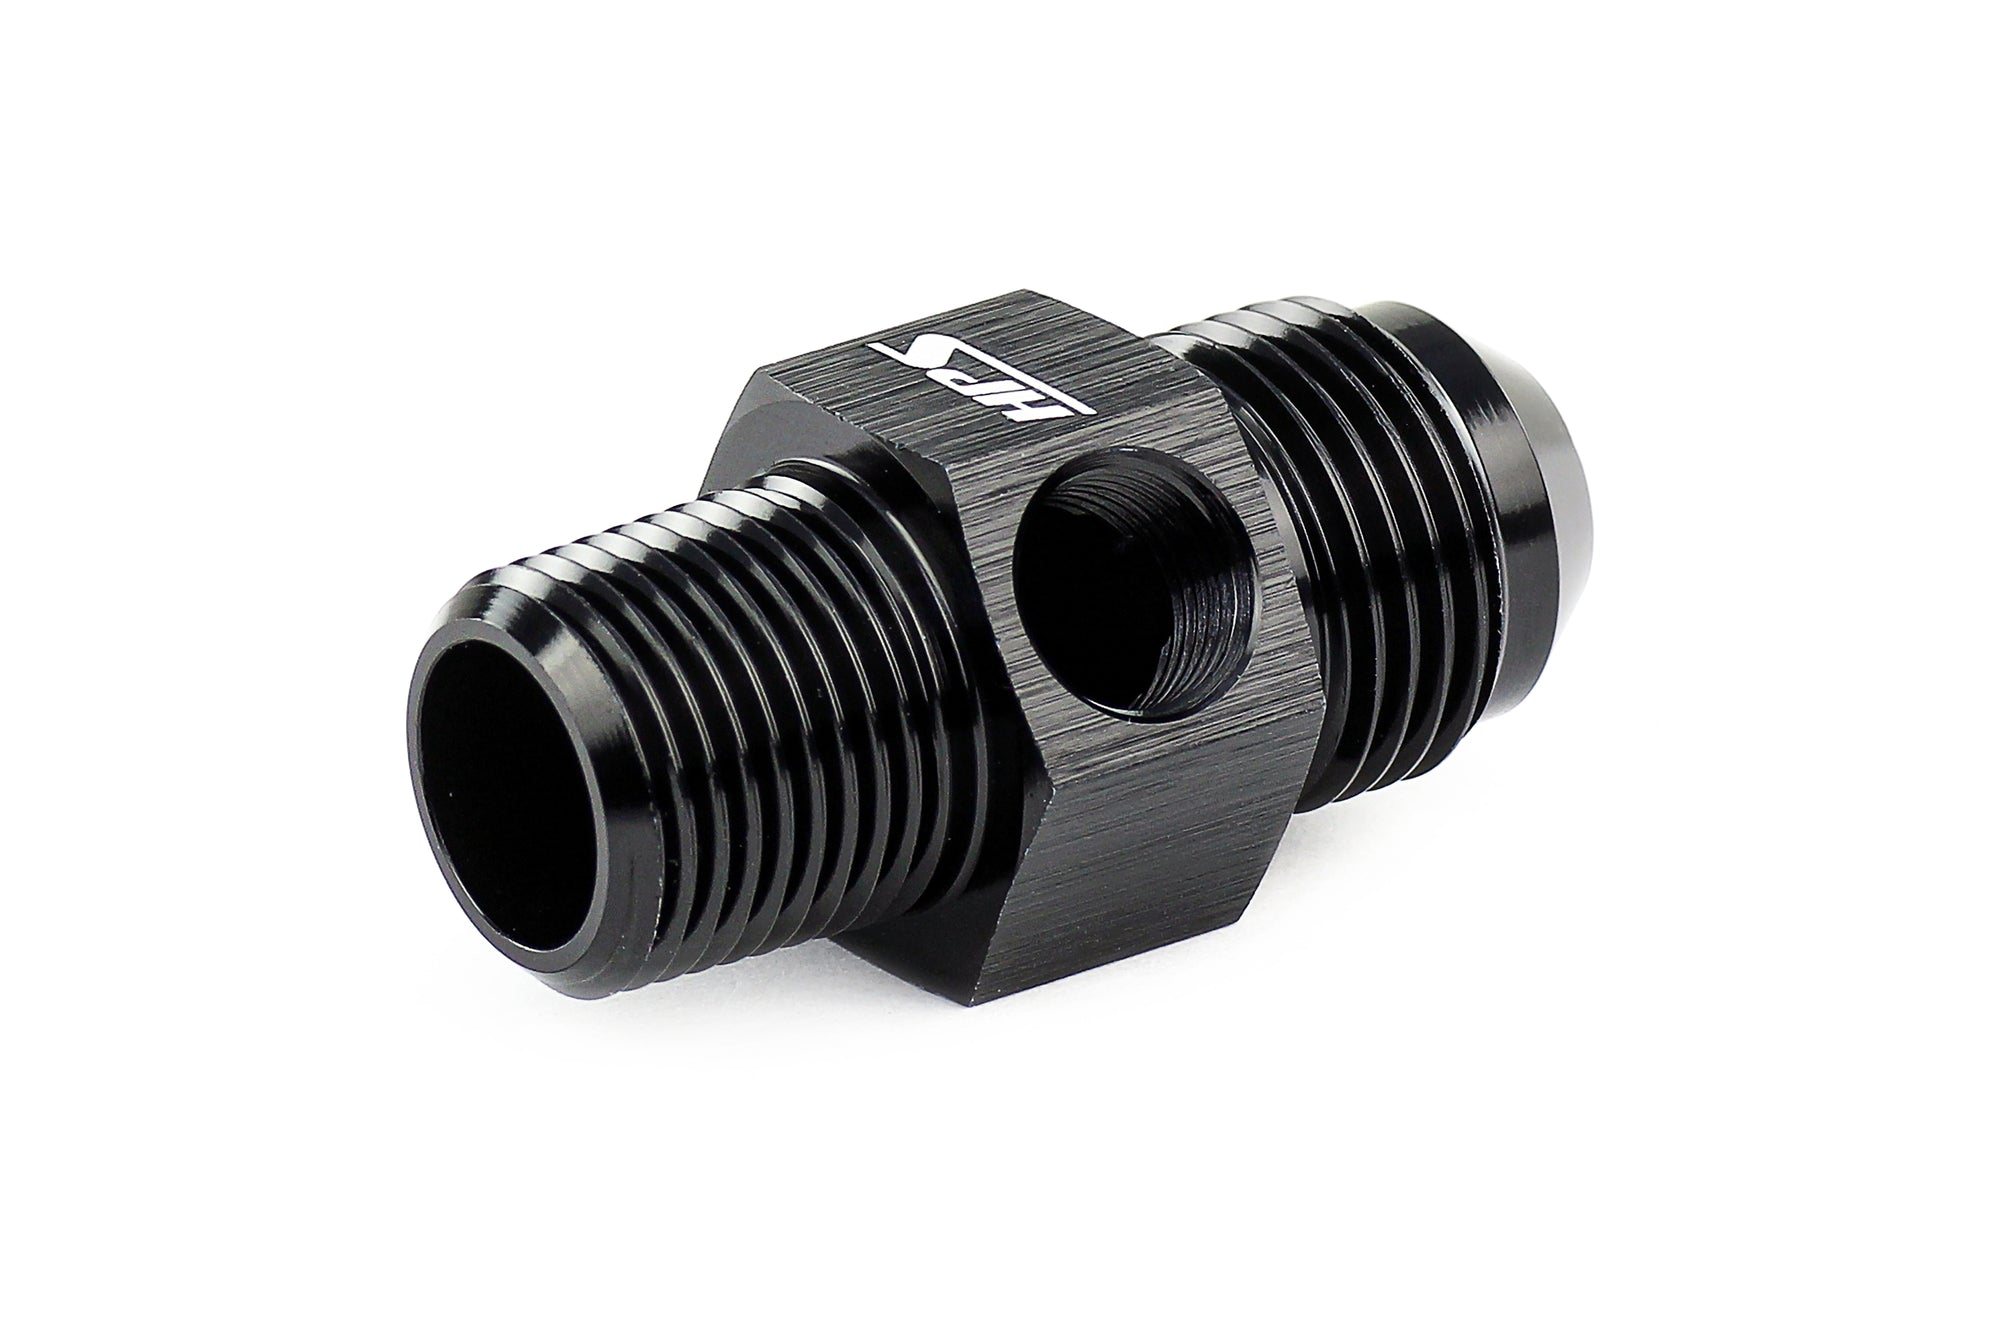 HPS Performance Black Aluminum AN Male to NPT Male Adapter with 1/8" NPT Female Port -10 1/8" 1/4"